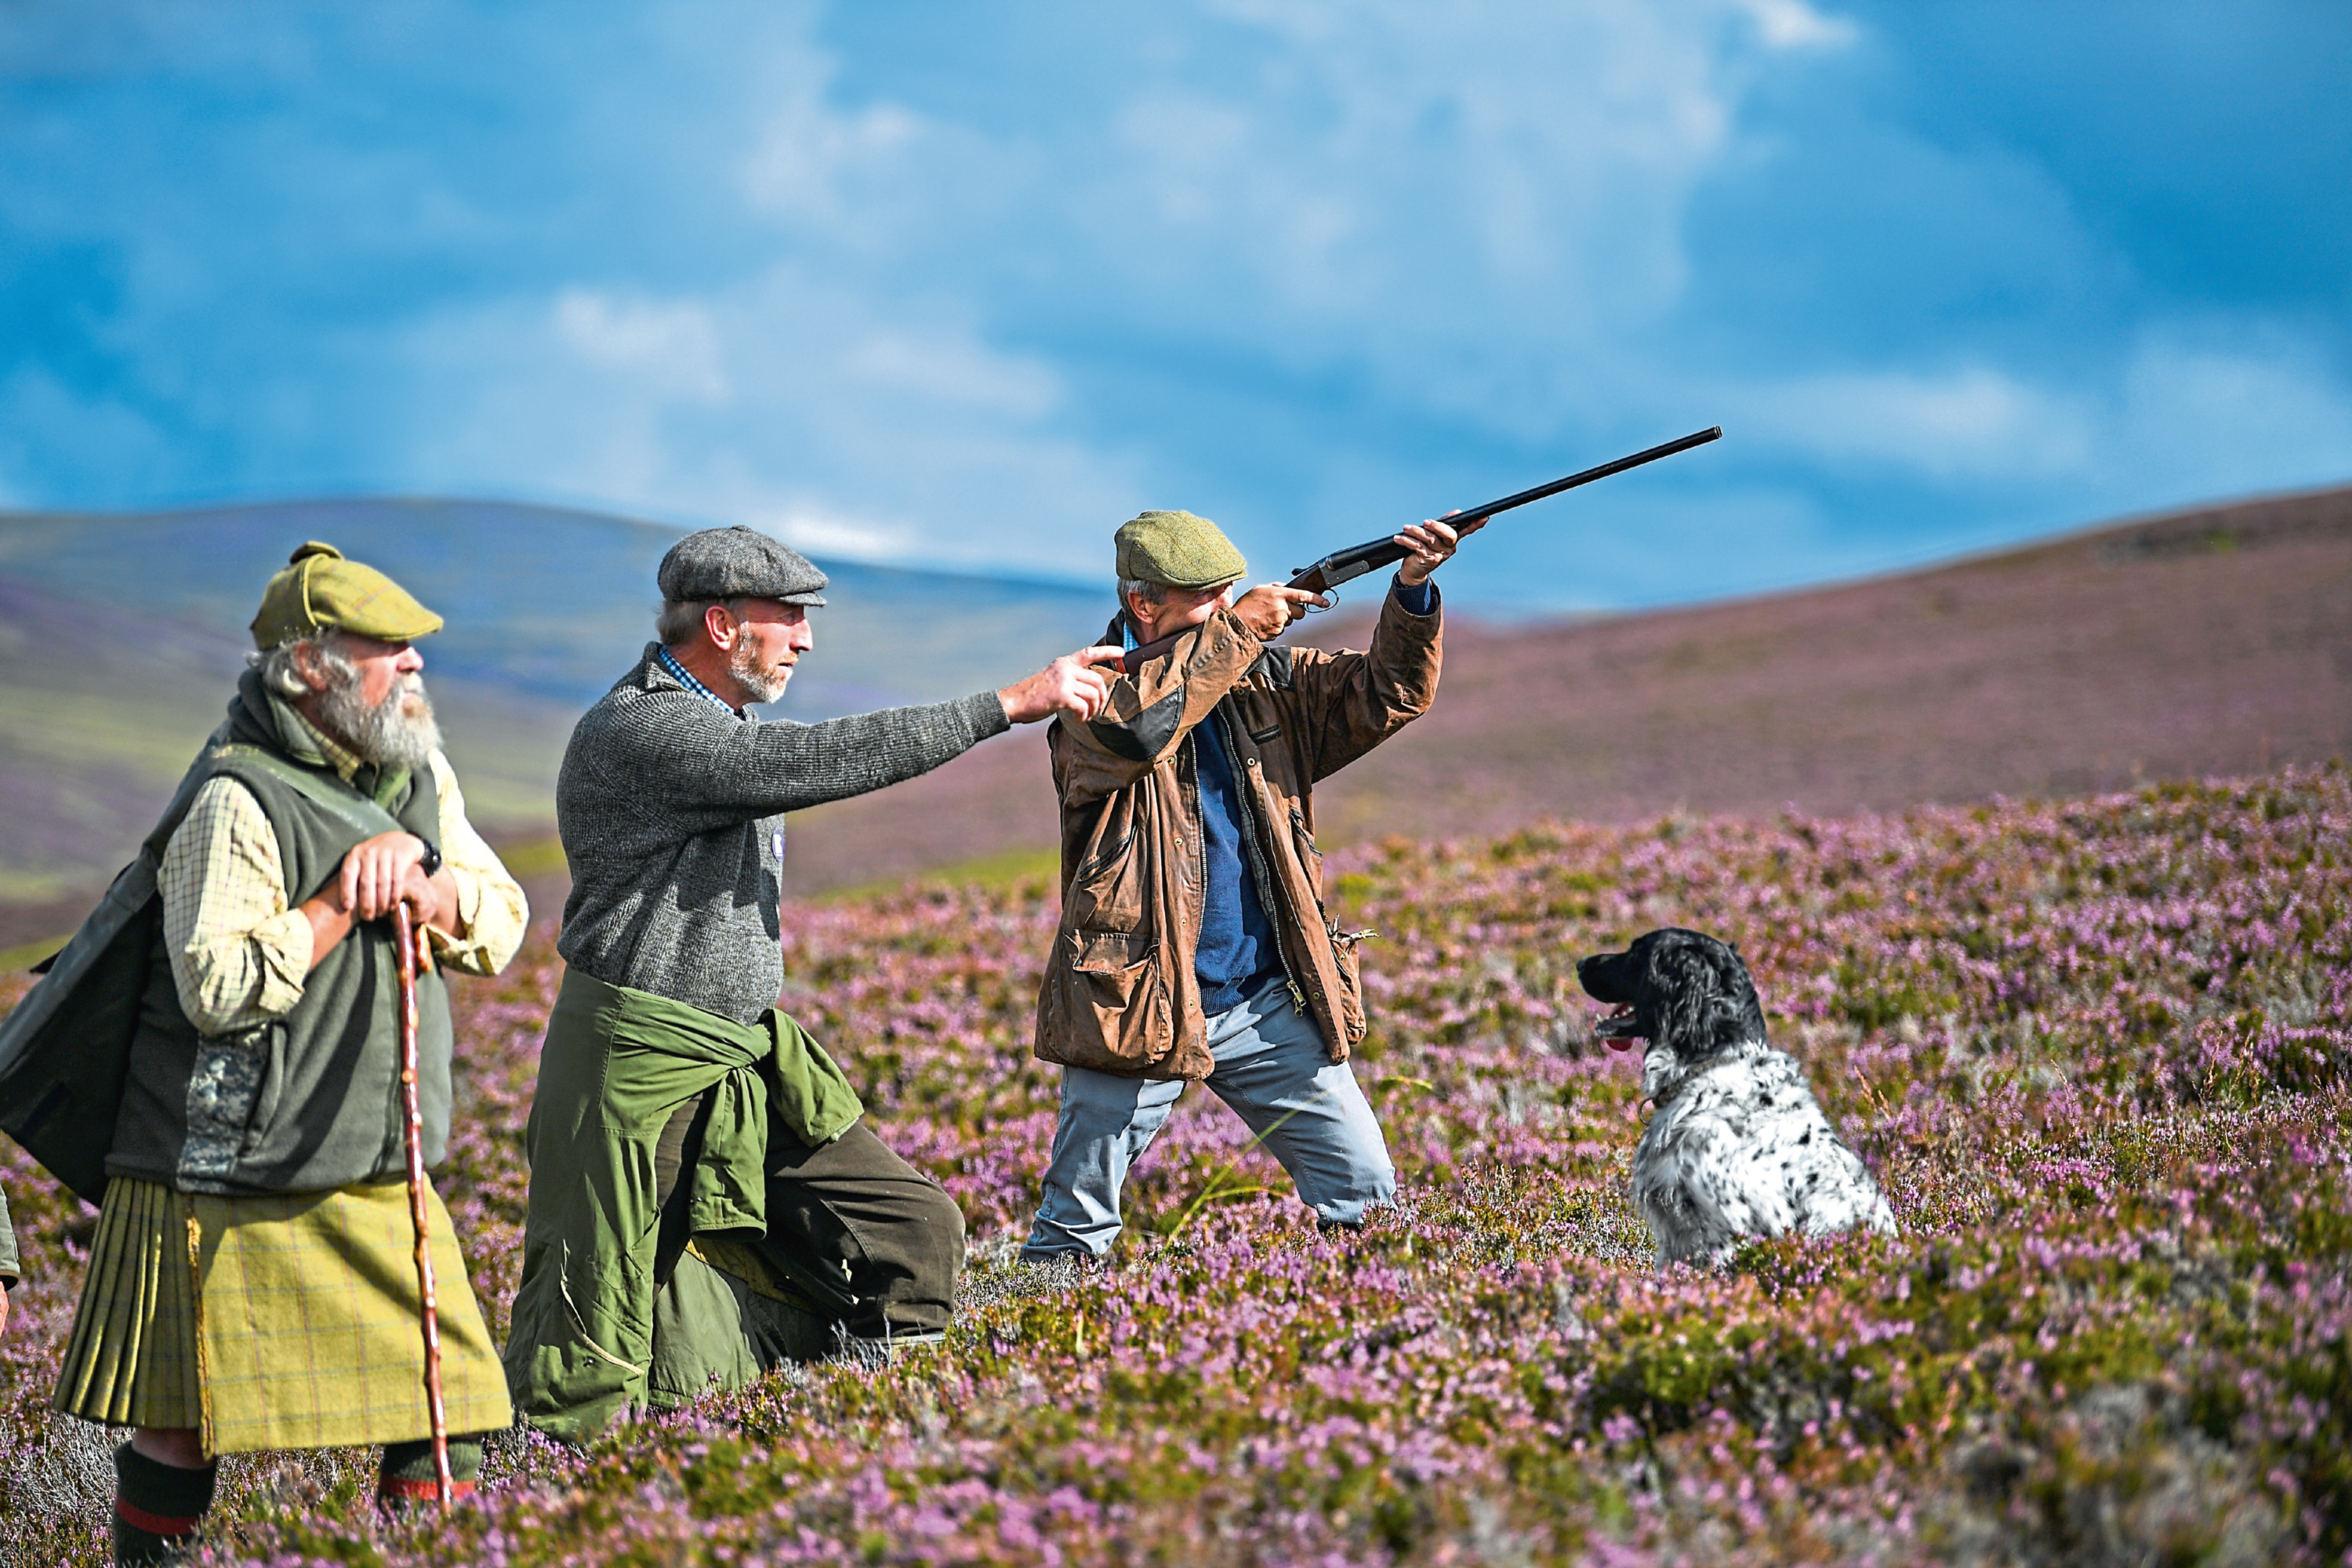 Grouse shooting is thought to be down this year across Scotland